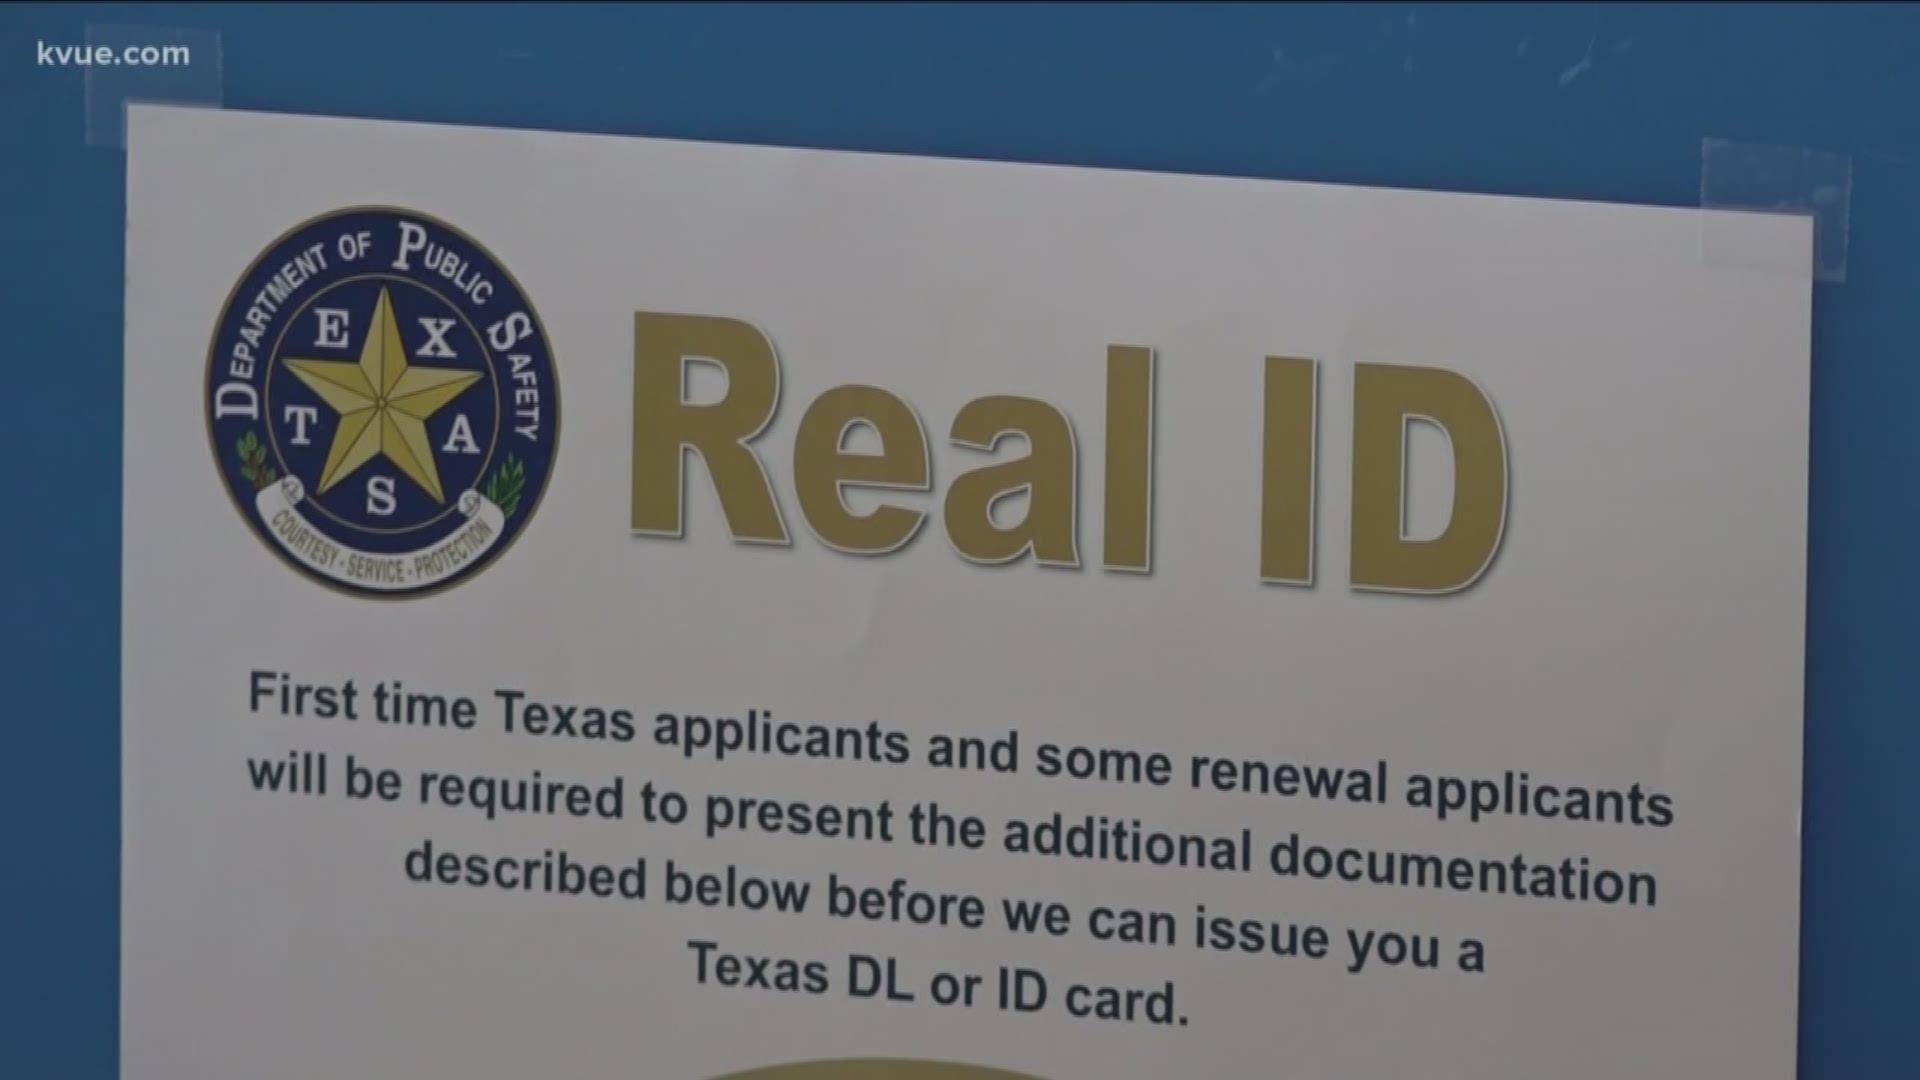 There's about 8 months left to swap out your driver's license to make sure it's Real ID compliant.